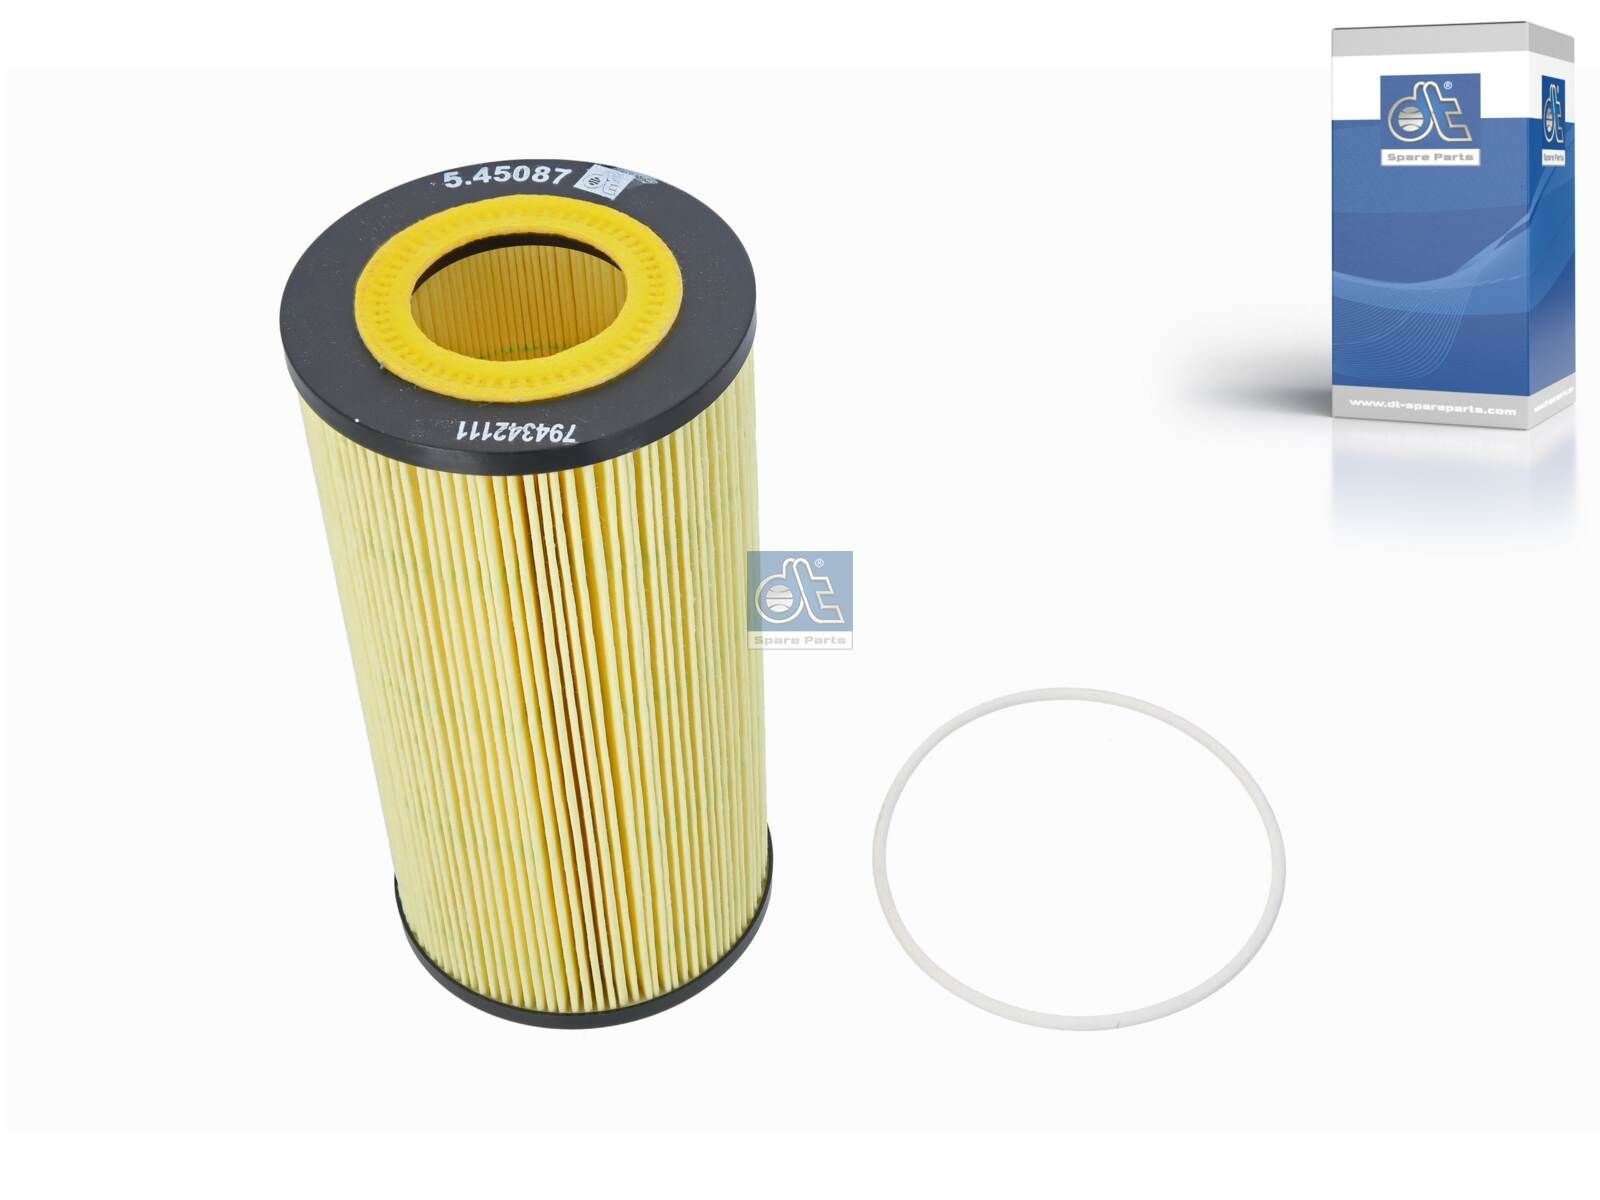 HU 12 103 x DT Spare Parts 5.45087 Oil filter 1948921G